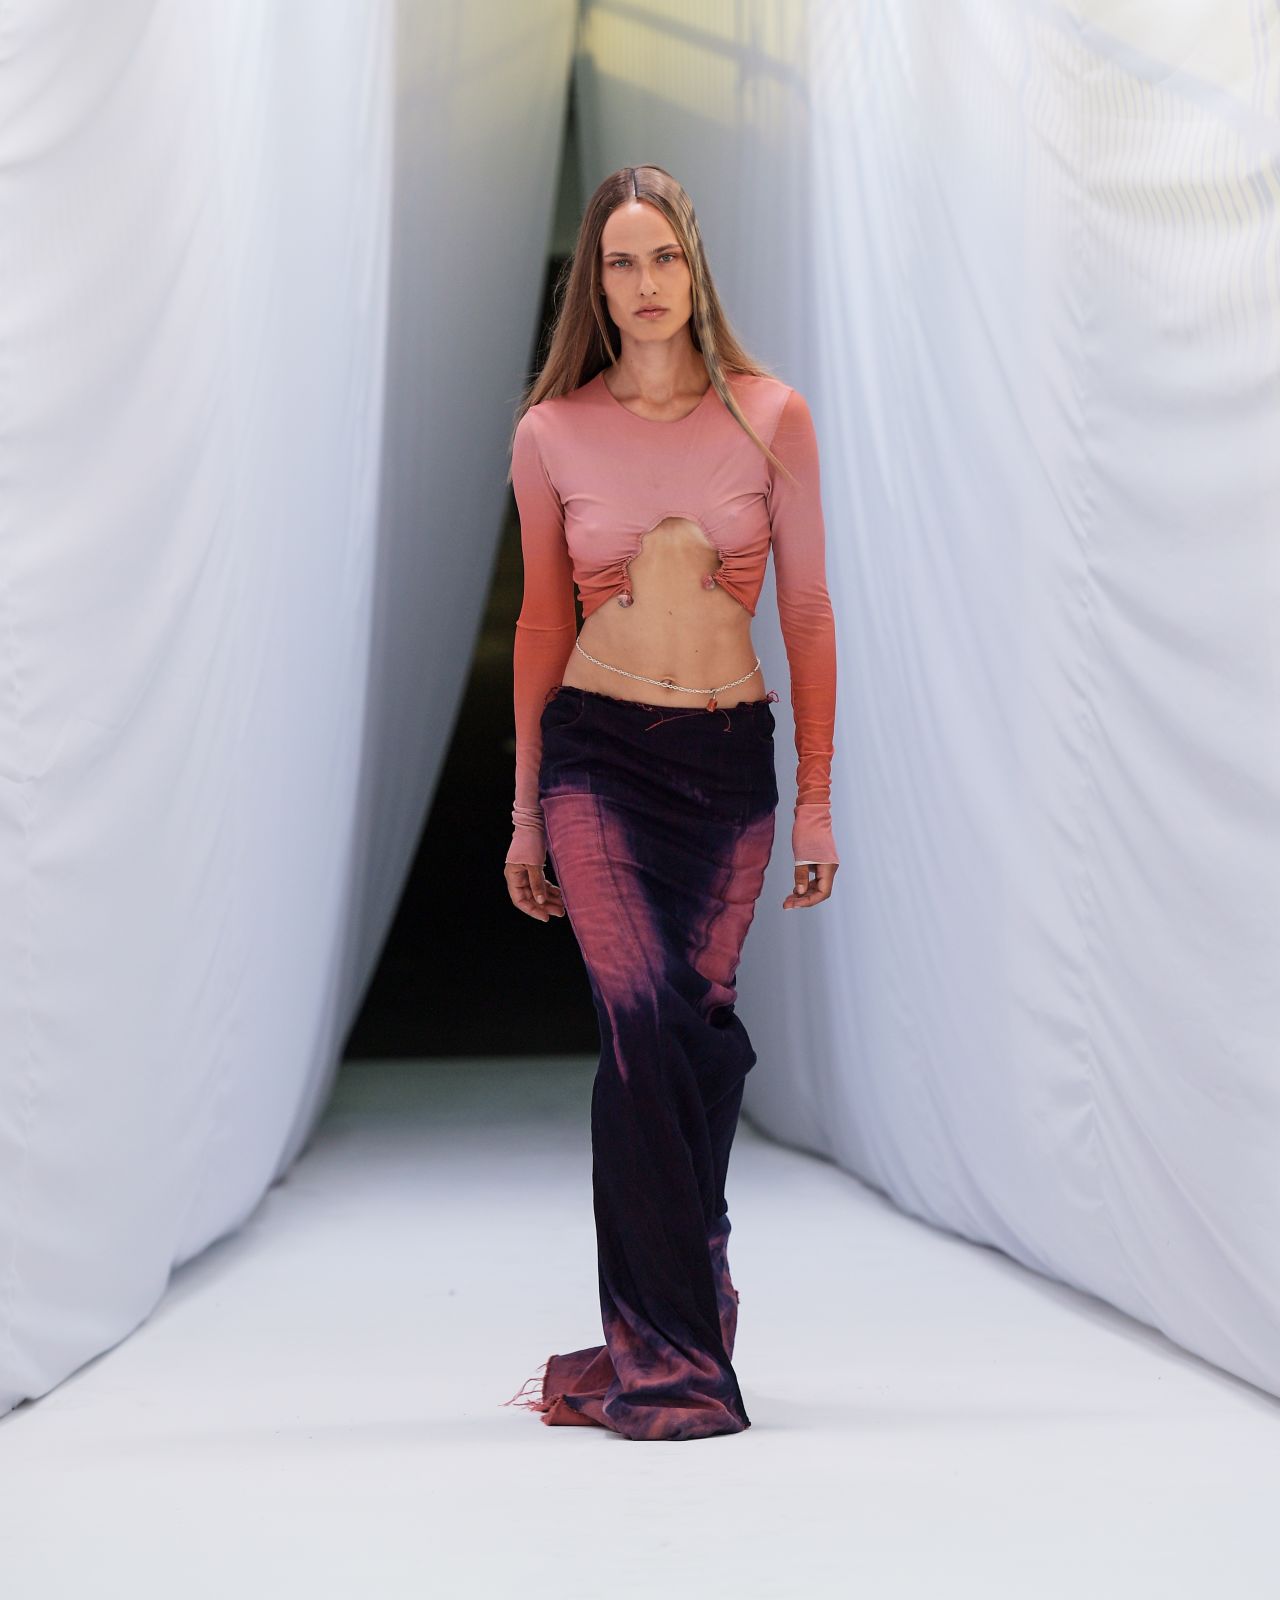 Jade Cropper SS23 gave traditional feminine forms a twist.